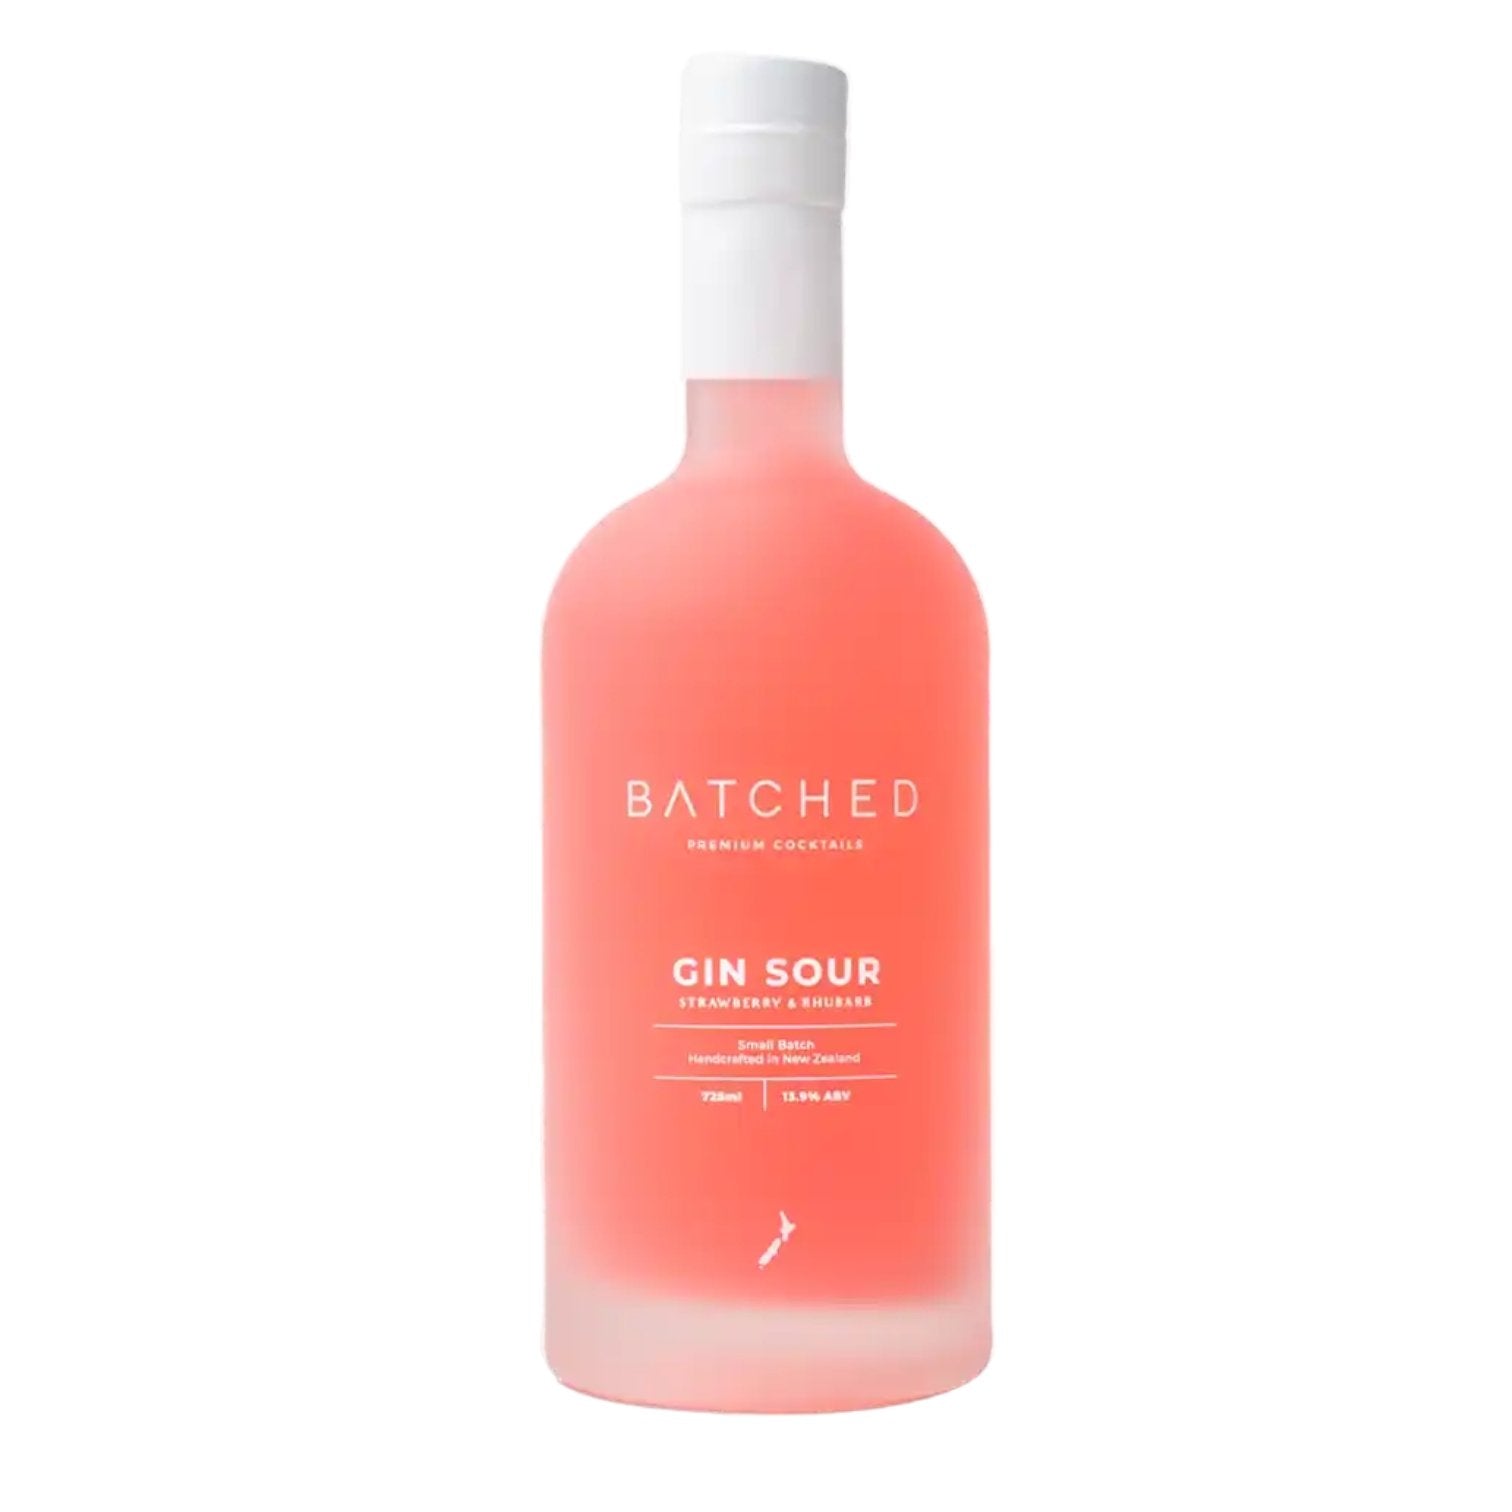 Batched Gin Sour Strawberry & Rhubarb 725ml - Beautiful Gifts